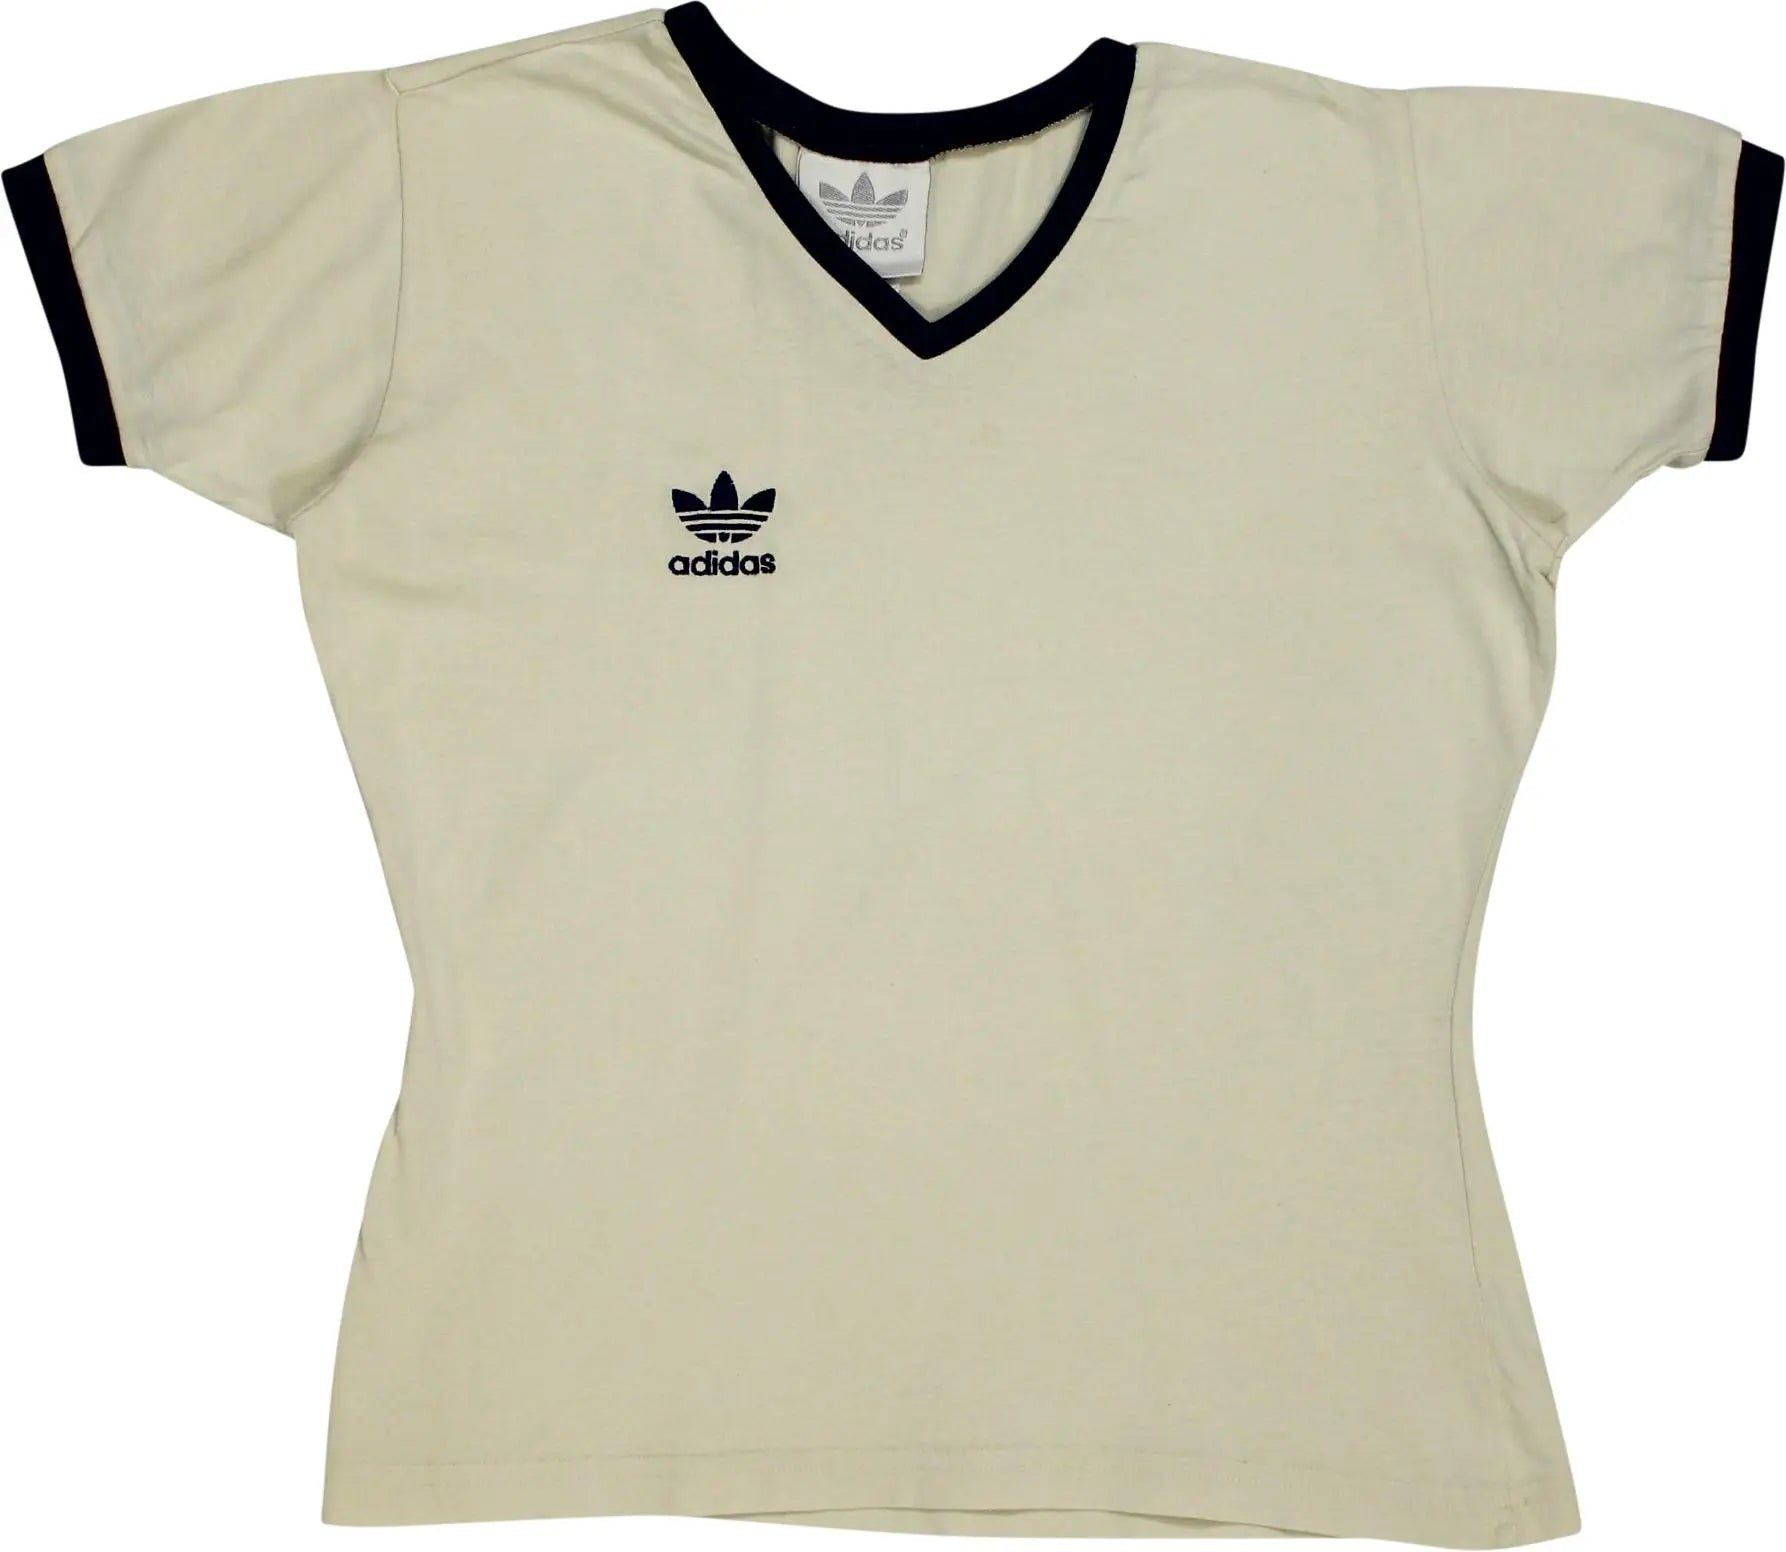 Adidas - Cream T-shirt by Adidas- ThriftTale.com - Vintage and second handclothing